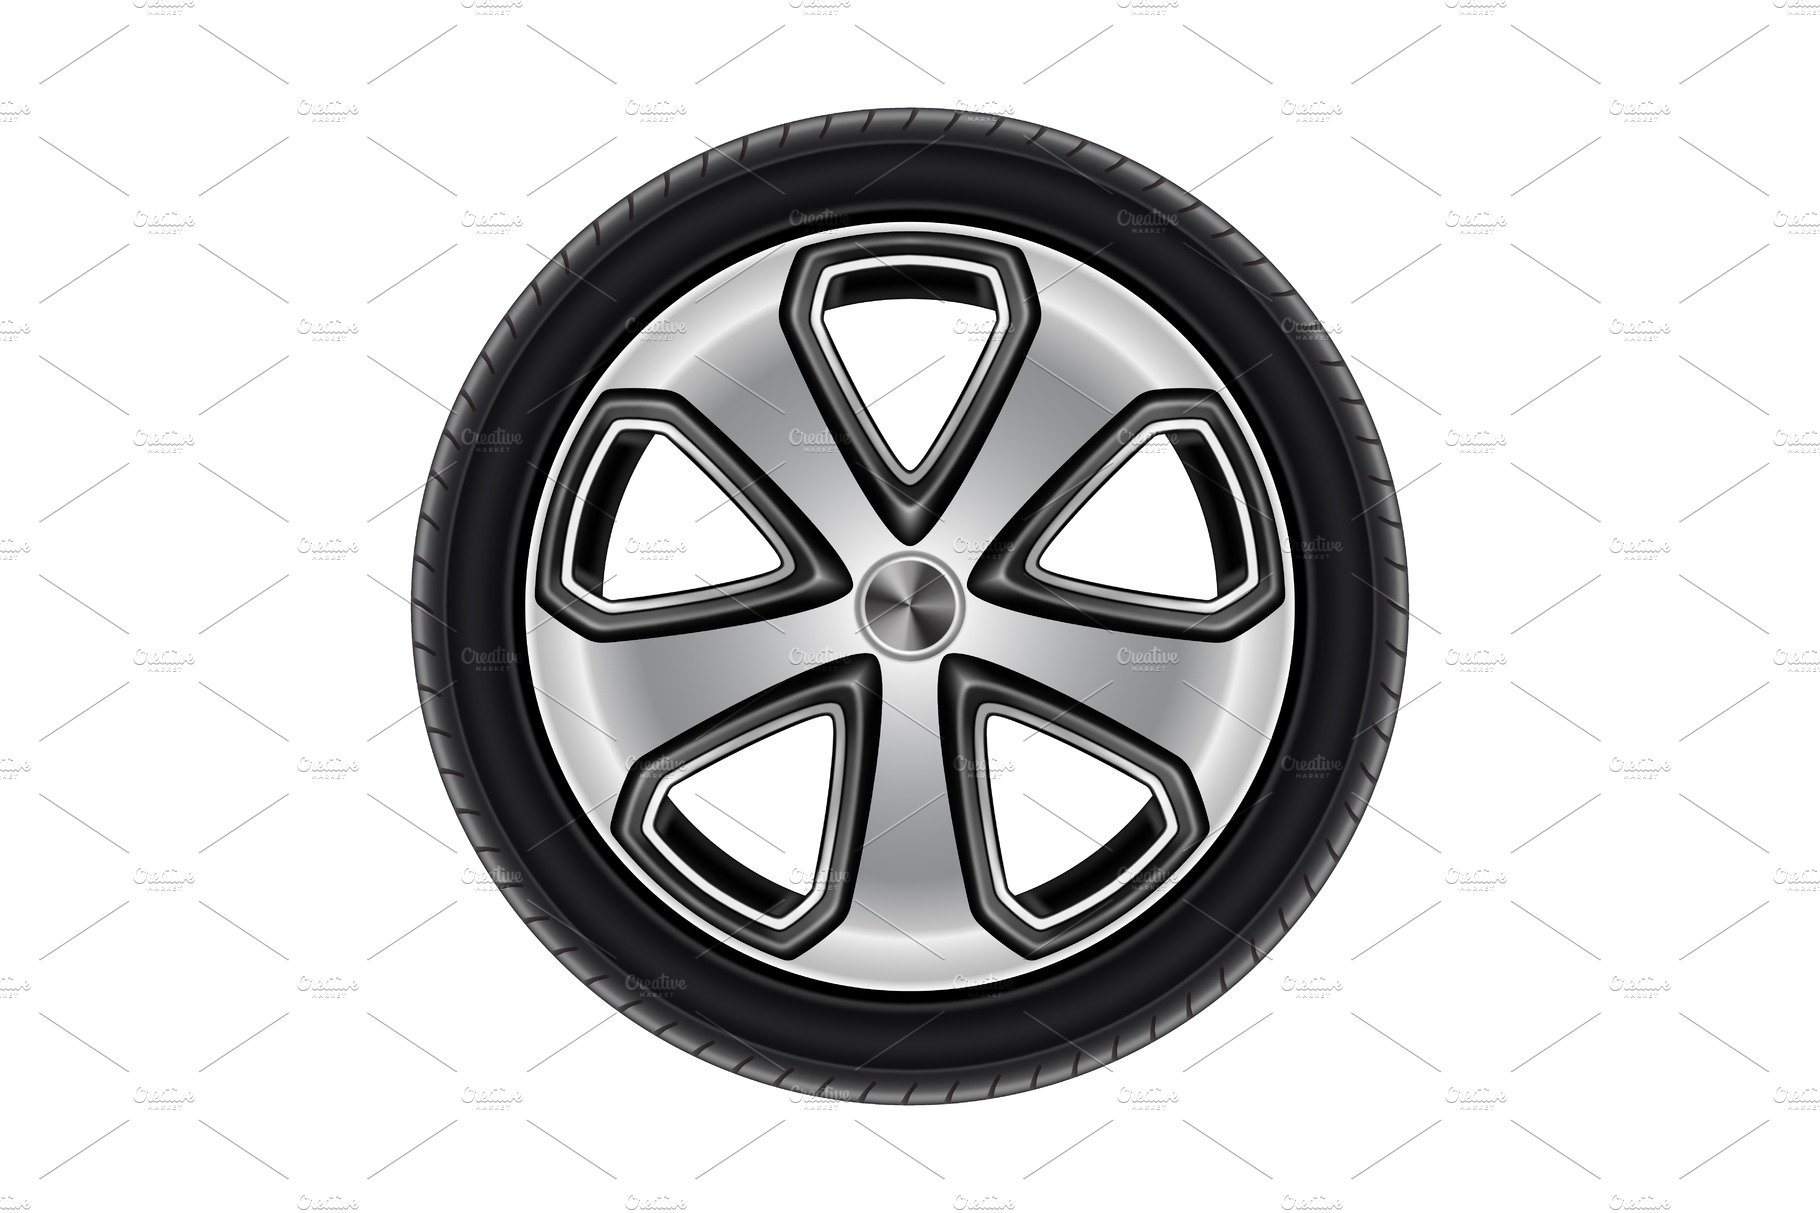 Wheel or tire, tyre of car or cover image.